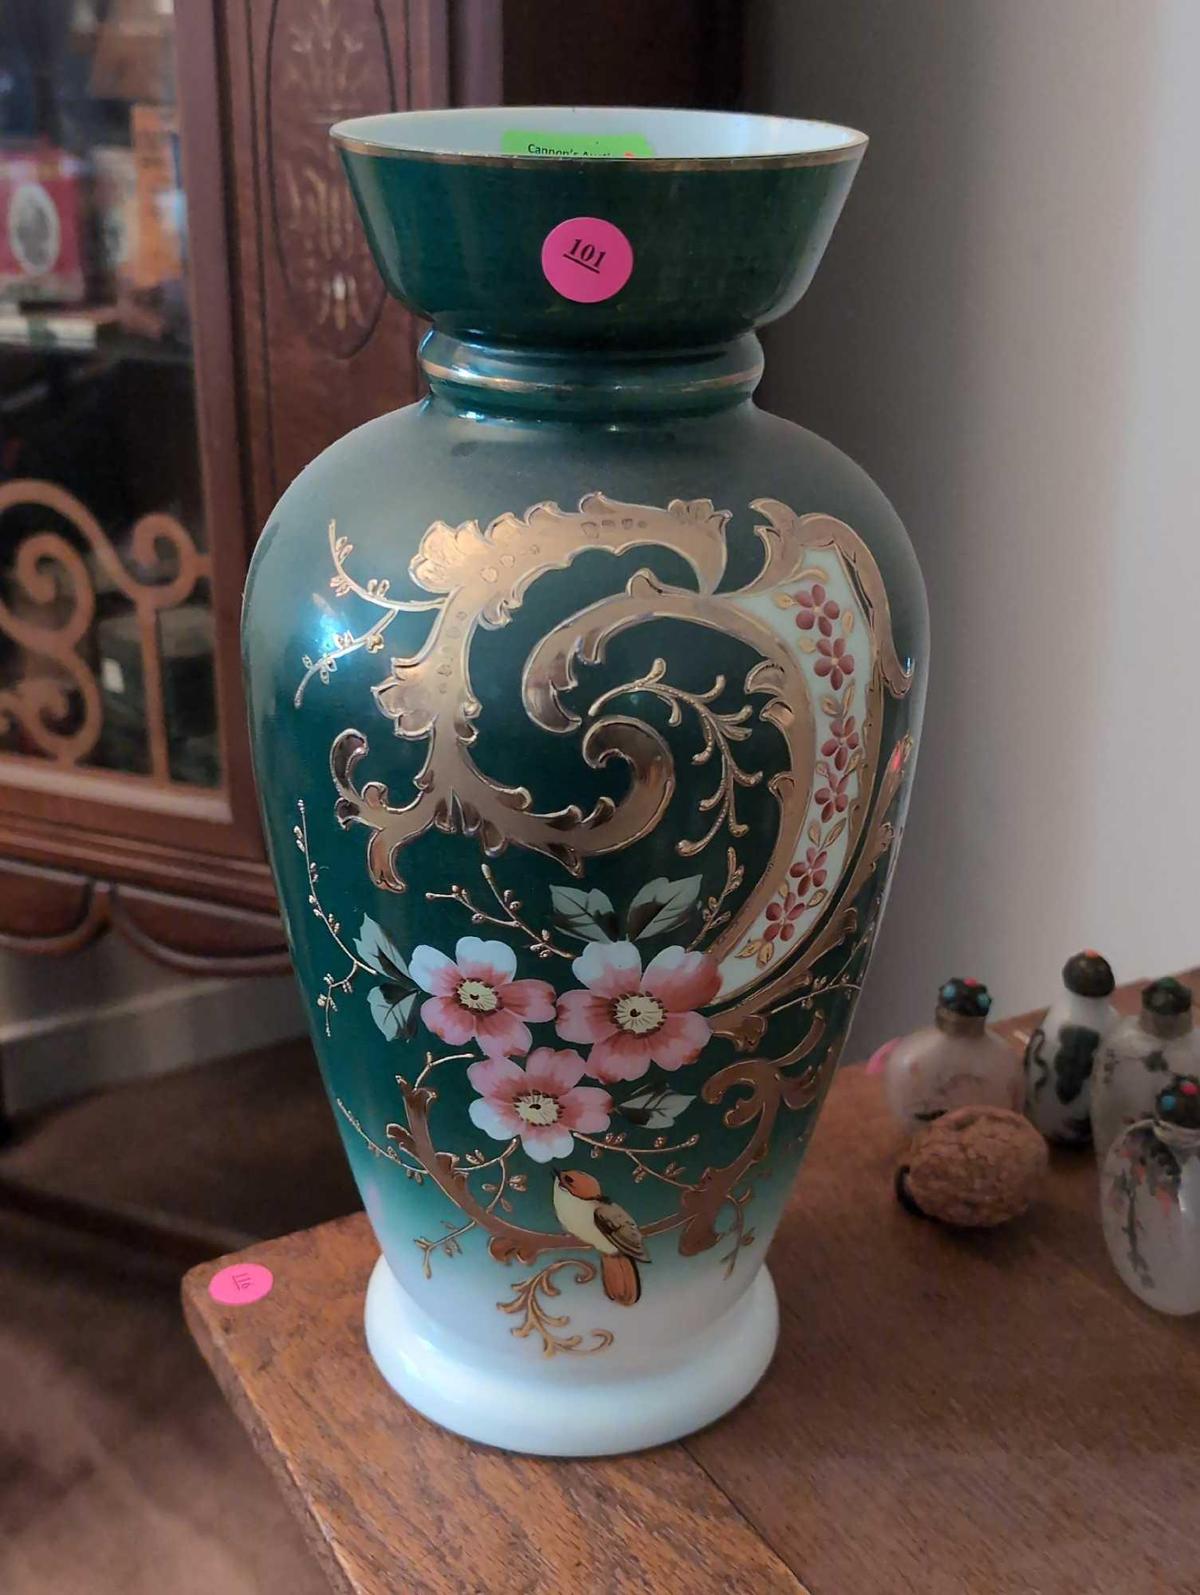 (LR) VINTAGE PAINTED MILK GLASS ORIENTAL DETAILED FLOWER VASE. FEATURING A MAIN GREEN COLOR WITH